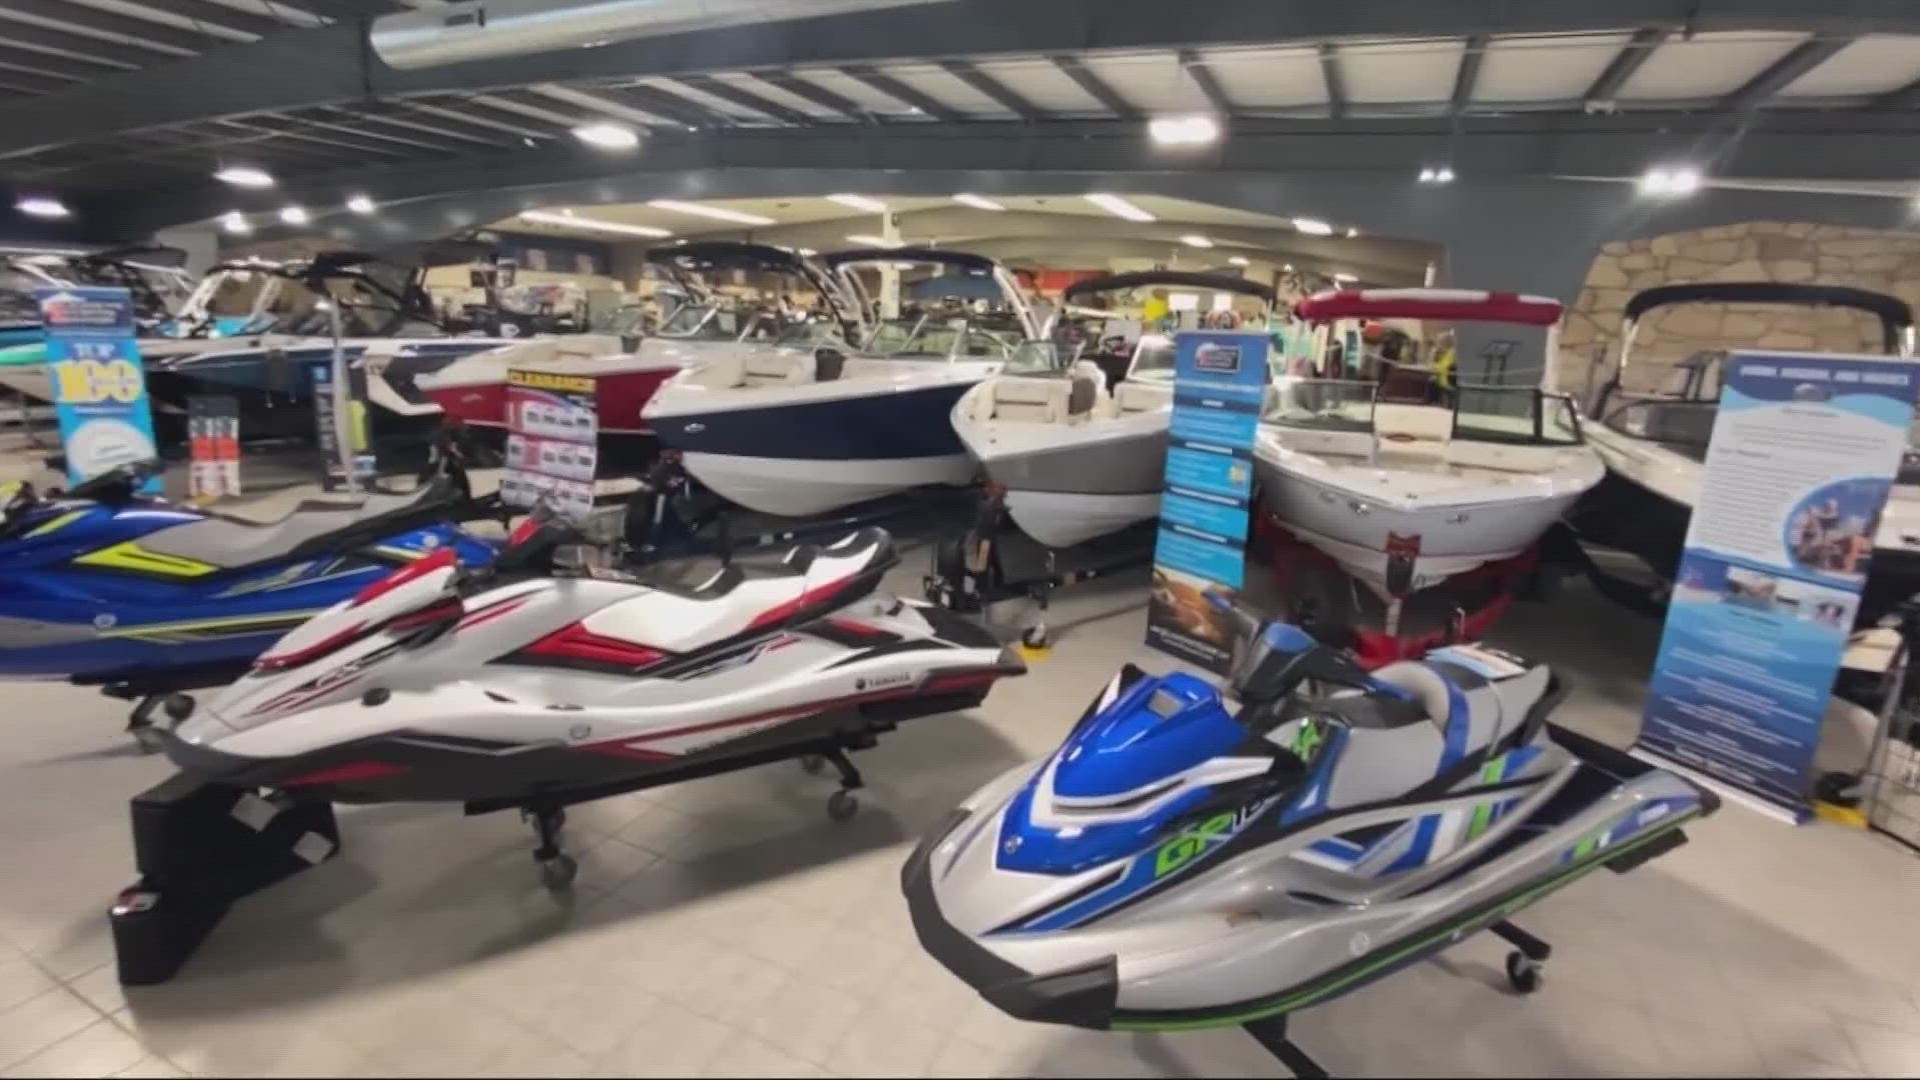 It's back! Here's what you need to know about the 2023 Progressive Cleveland Boat Show at the I-X Center.